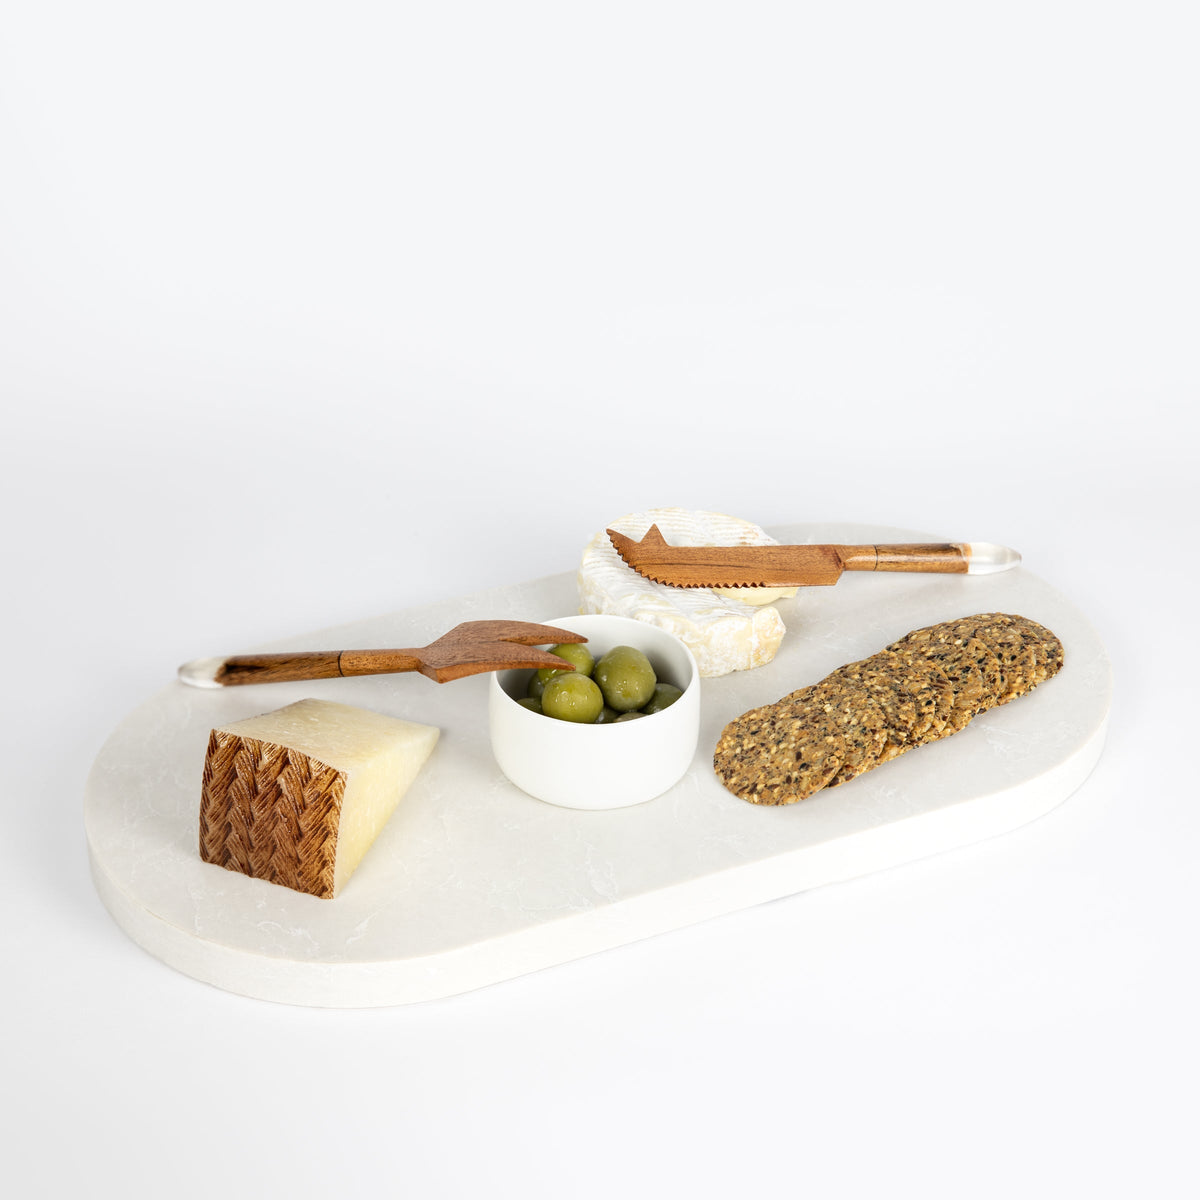 Double arch quartz platters in Caesarstone Alpine Mist™ created by Aureliia Collection. The Double arch quartz cheese boards shown with soft cheese, hard cheese wedge, sicilian olives and grain crackers with timber cheese knifes. An excellent home decor gift for someone who has it all.